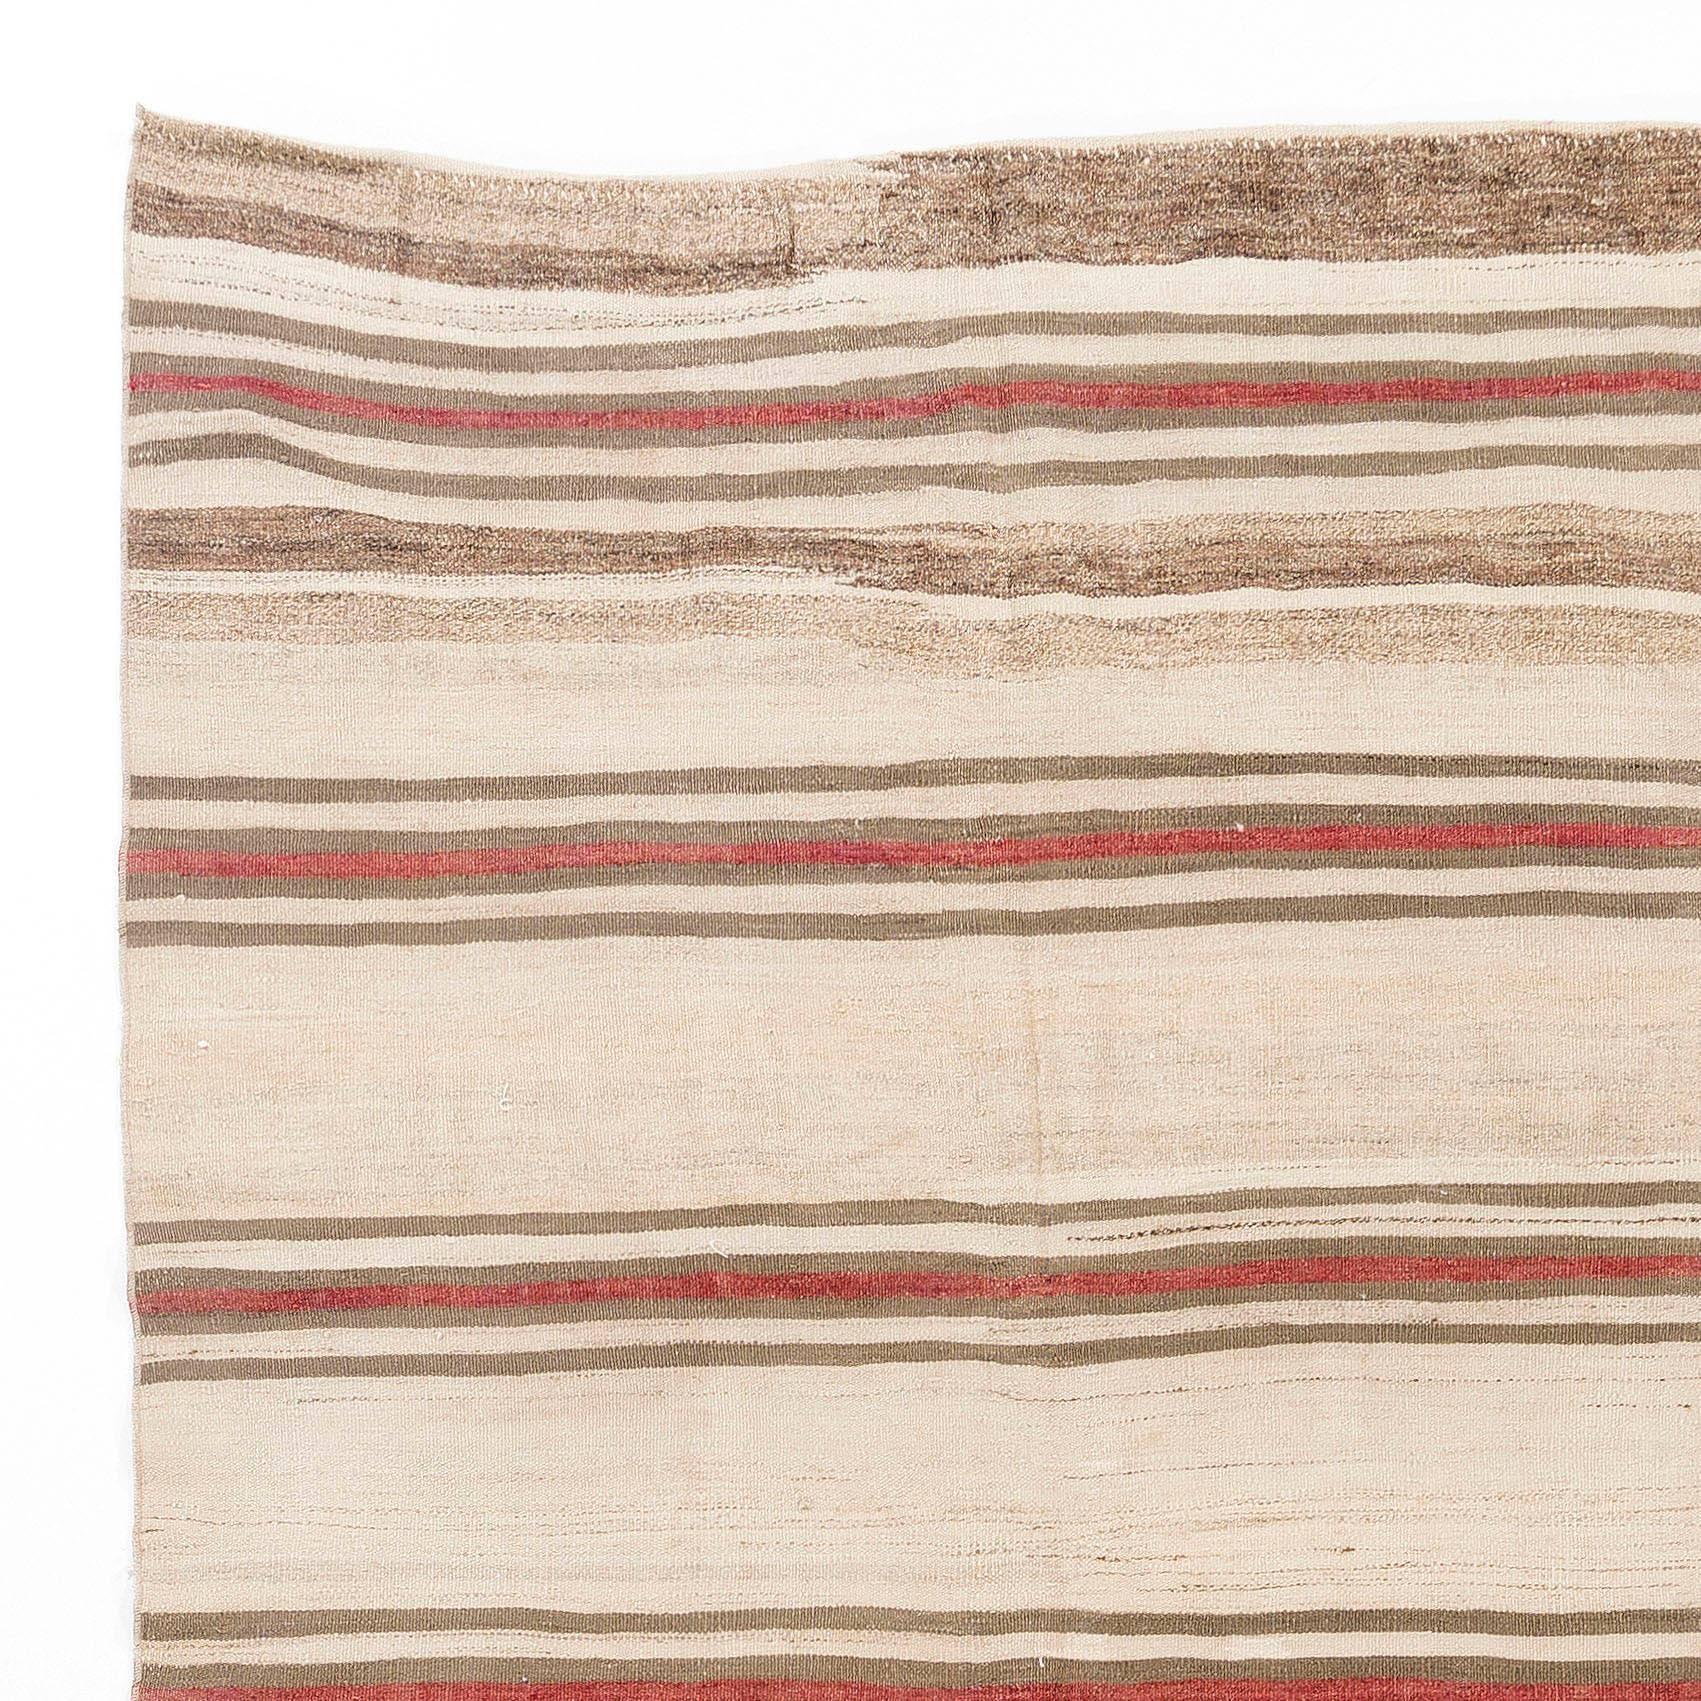 This beautiful and simple flat-woven rug is made of natural un-dyed wool in various shades of brown and beige with a touch of madder dyed terracotta red. Measures: 4.7 x 12 Ft.
We can modify the dimensions if requested, i.e. make it shorter and/or